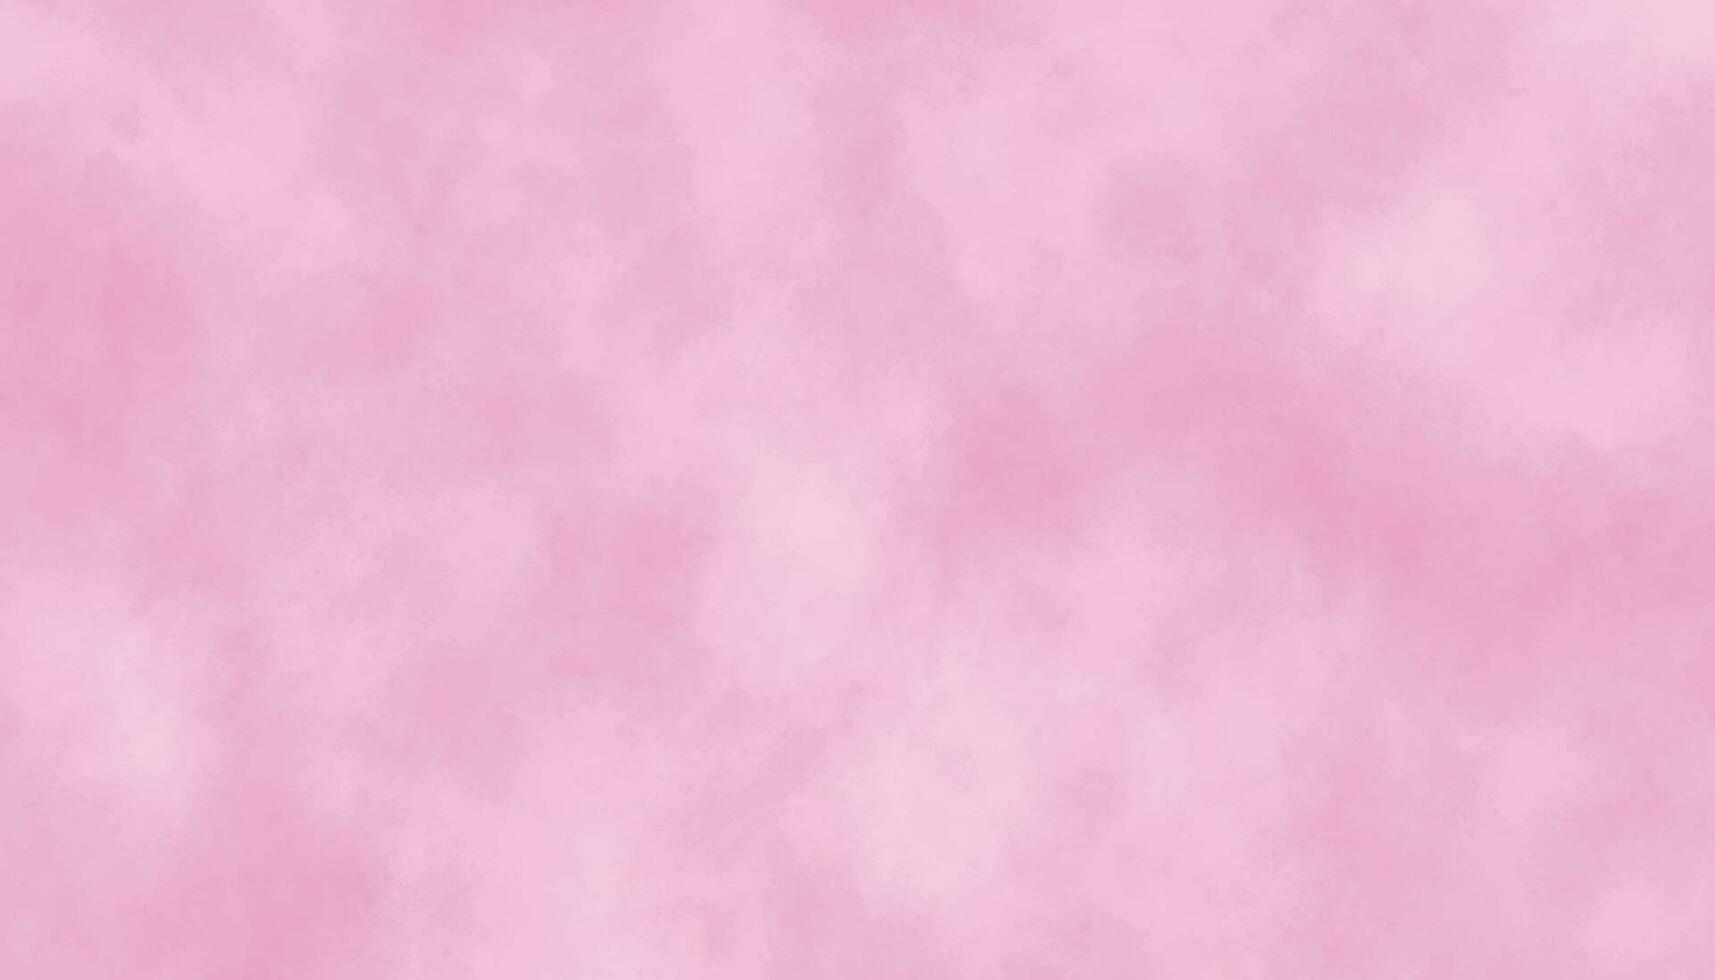 Soft Pink Watercolor background. Pink background with focus. Pink watercolor background. Abstract Pink watercolor background texture, Soft blurred abstract pink roses background vector